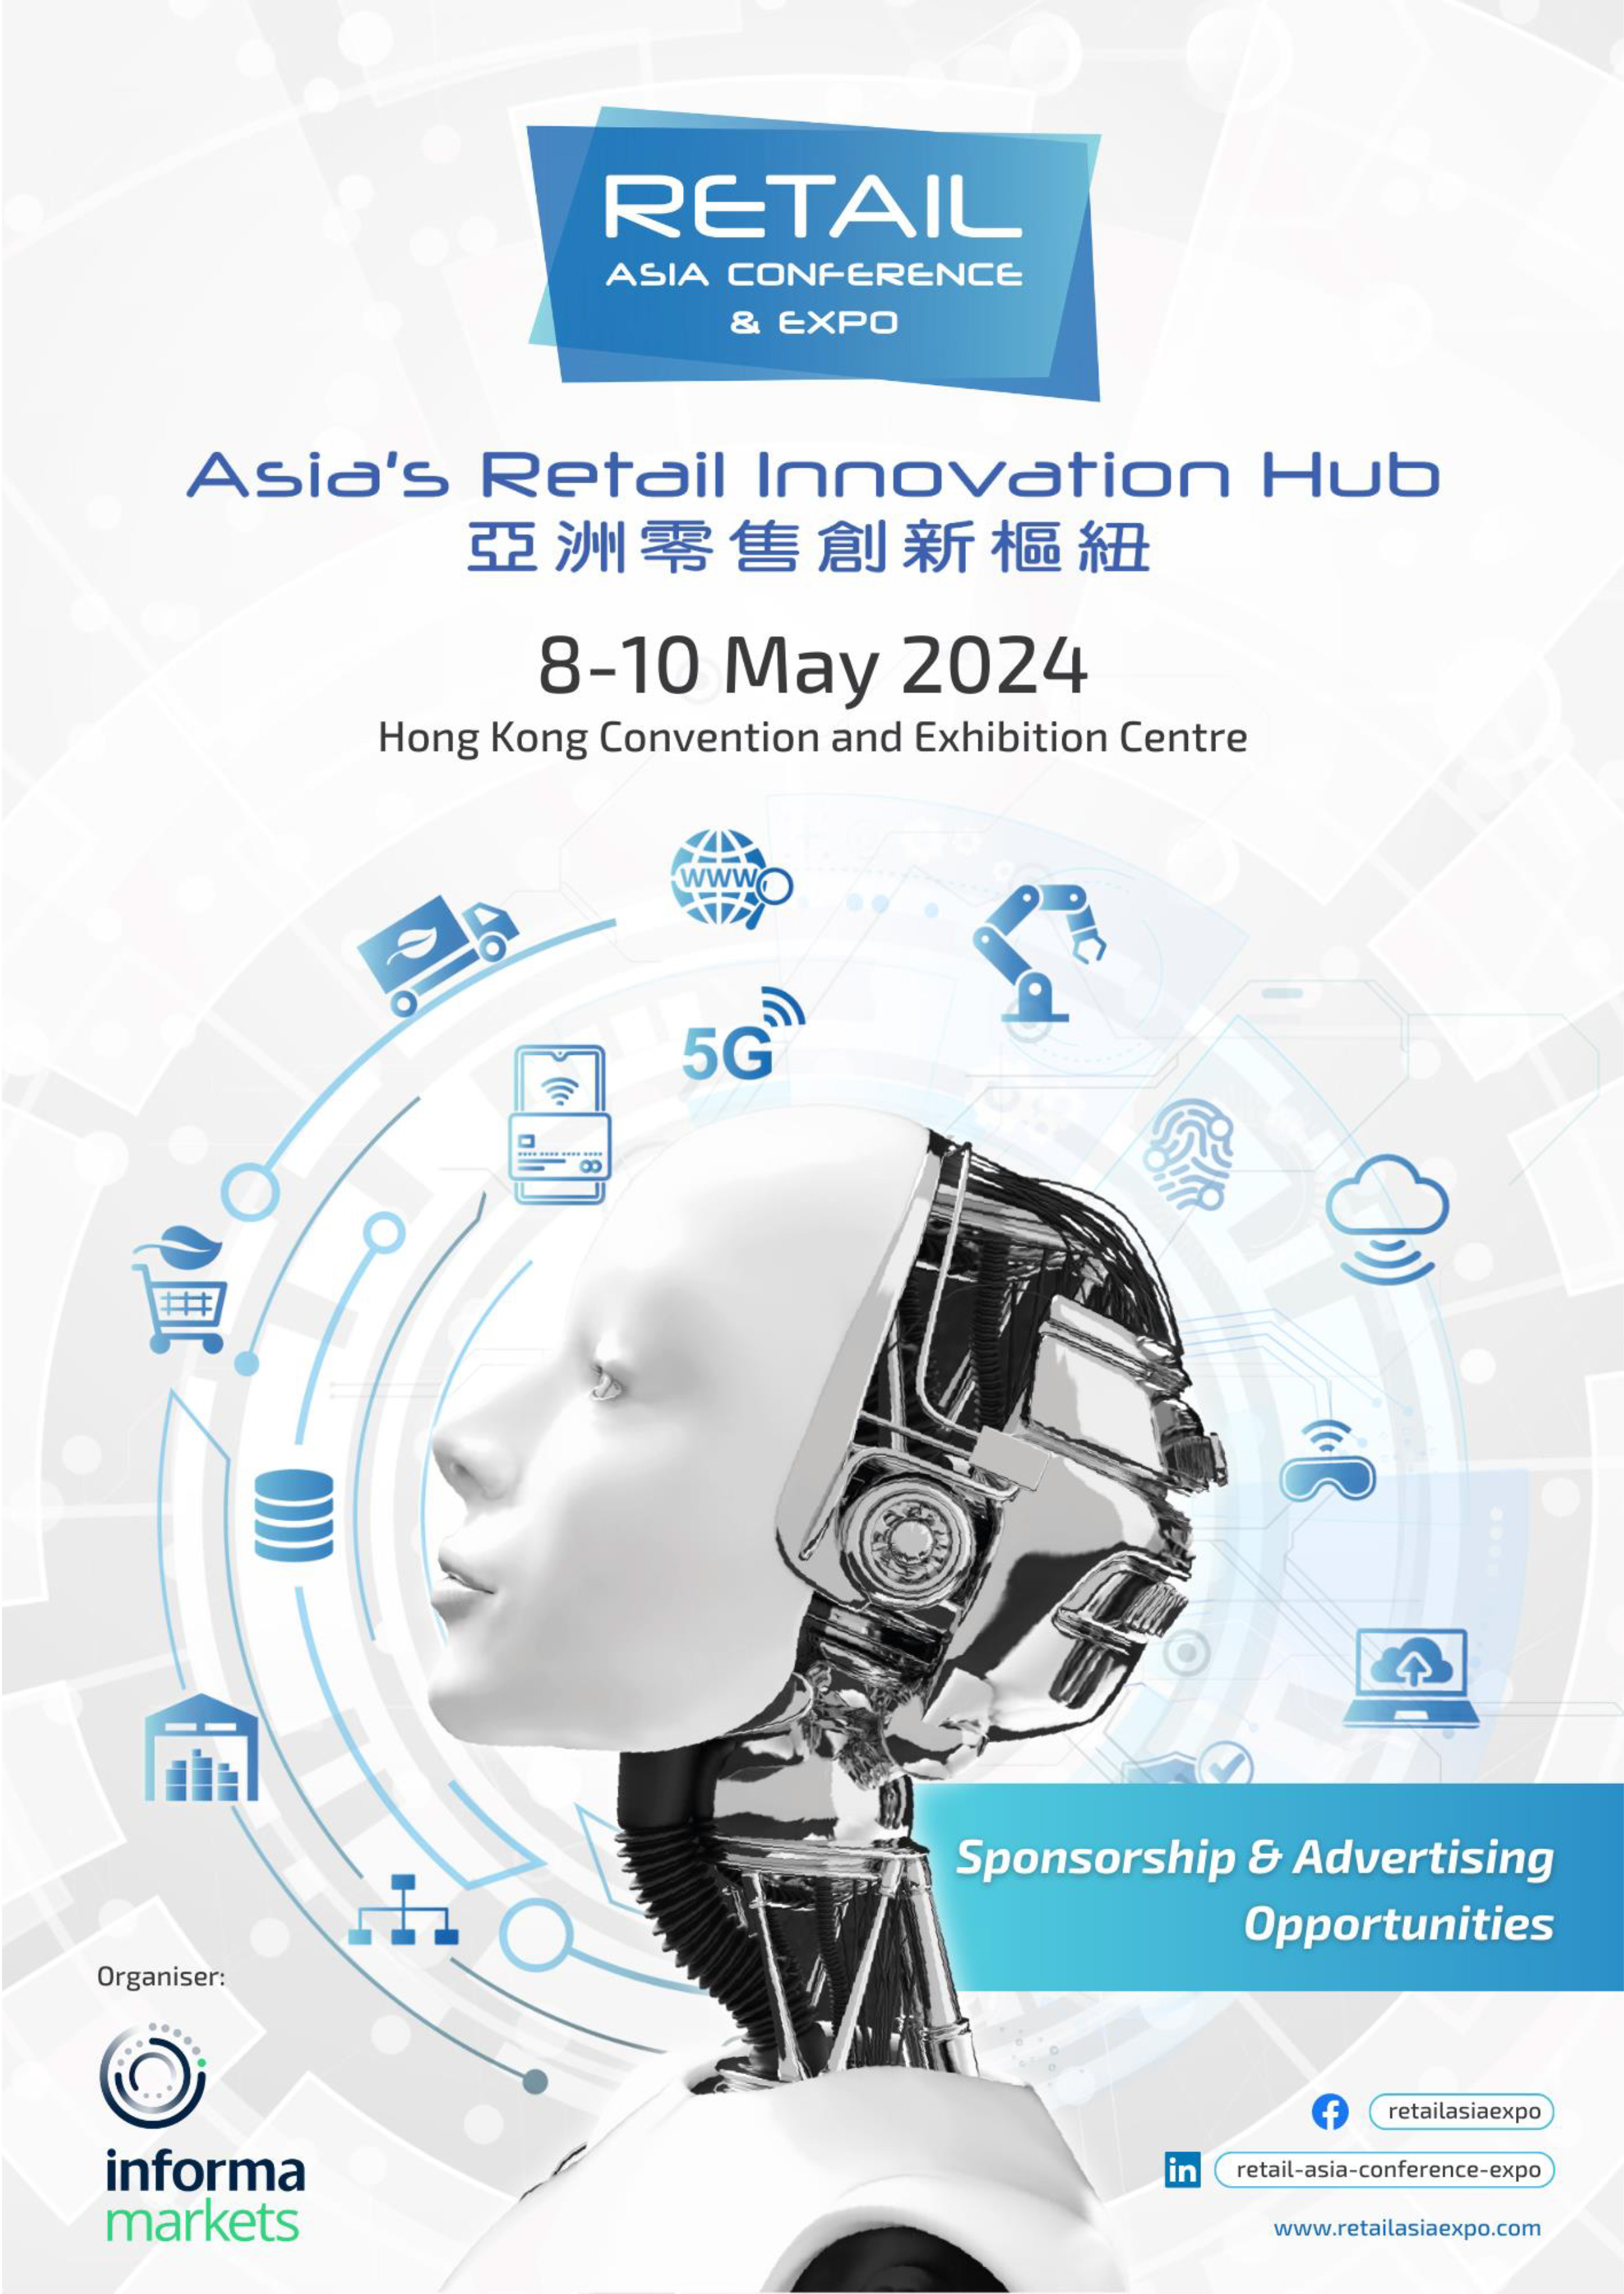 Guangzhou ORIO CO.,LTD will attend Retail Asia Conference & Expo 2024 in HONGKONG